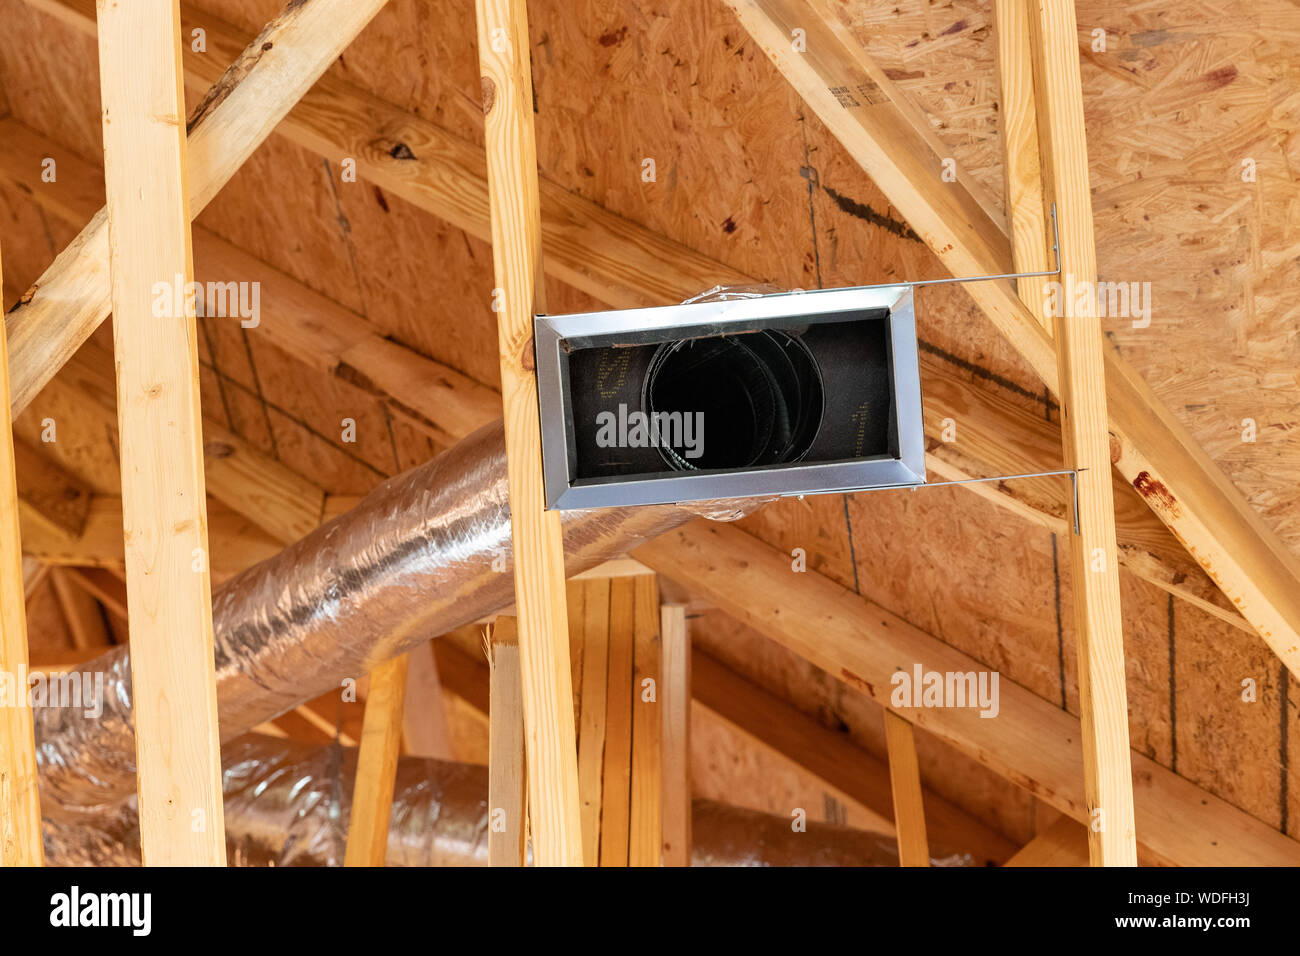 New air conditioner vents in new home construction Stock Photo